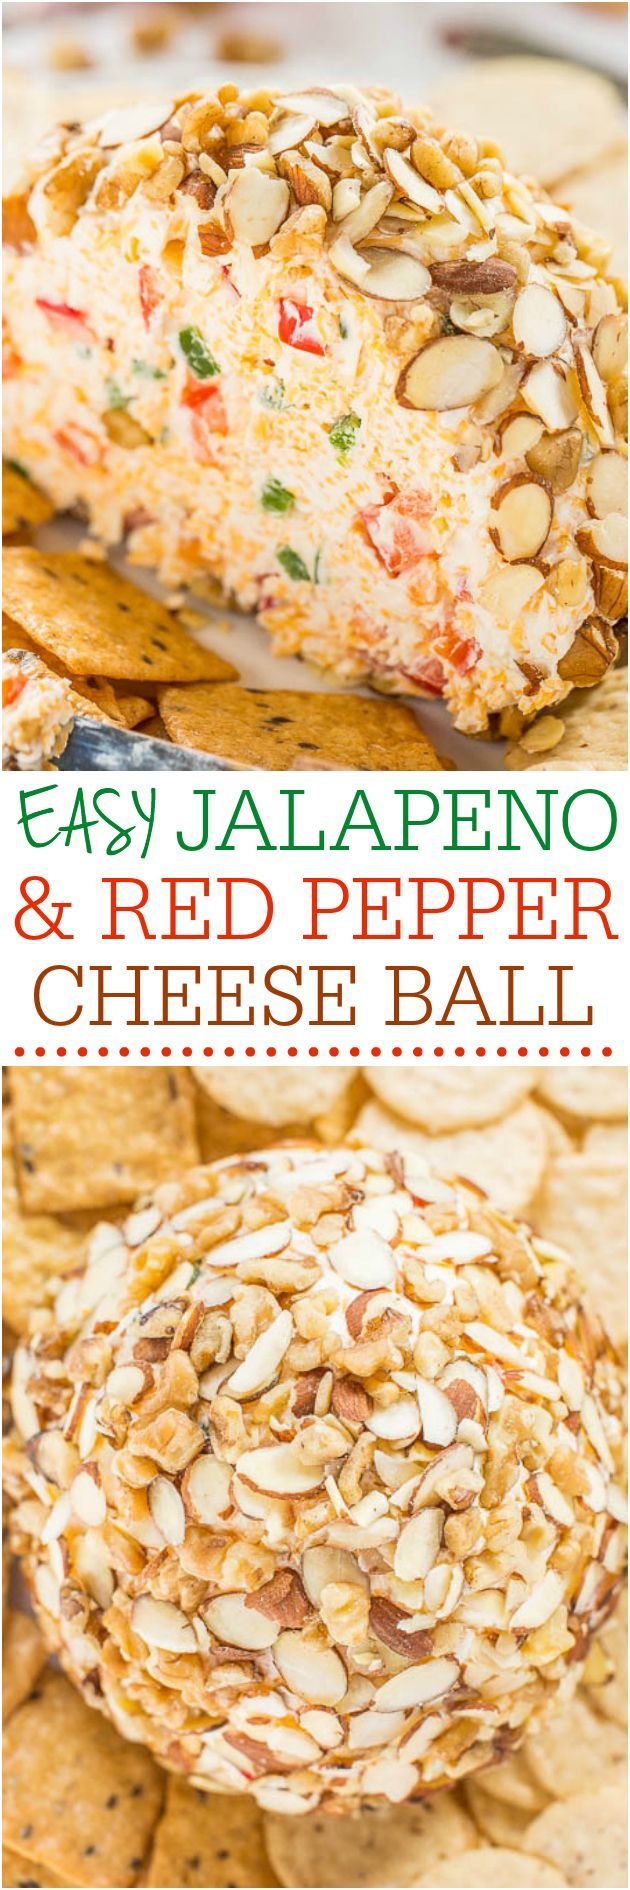 Easy Jalapeño and Red Pepper Cheese Ball – Just spicy enough that the more you have, the more you want!!